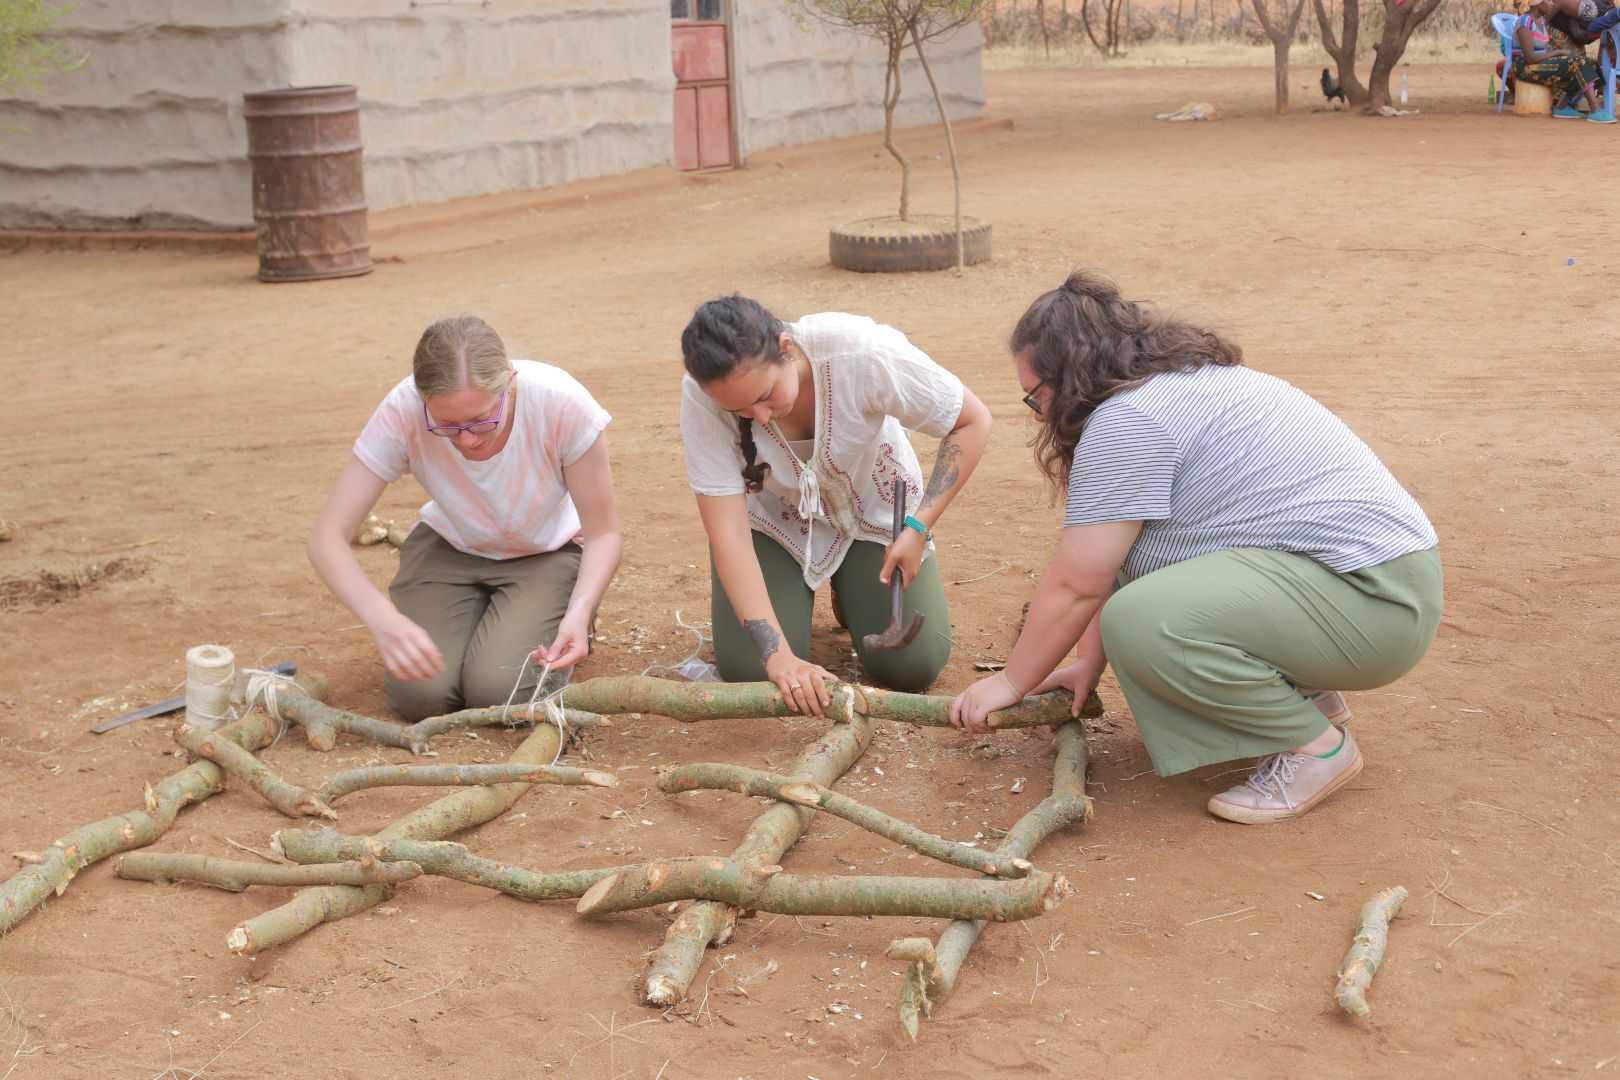 MSU students helping build a structure in Tanzania